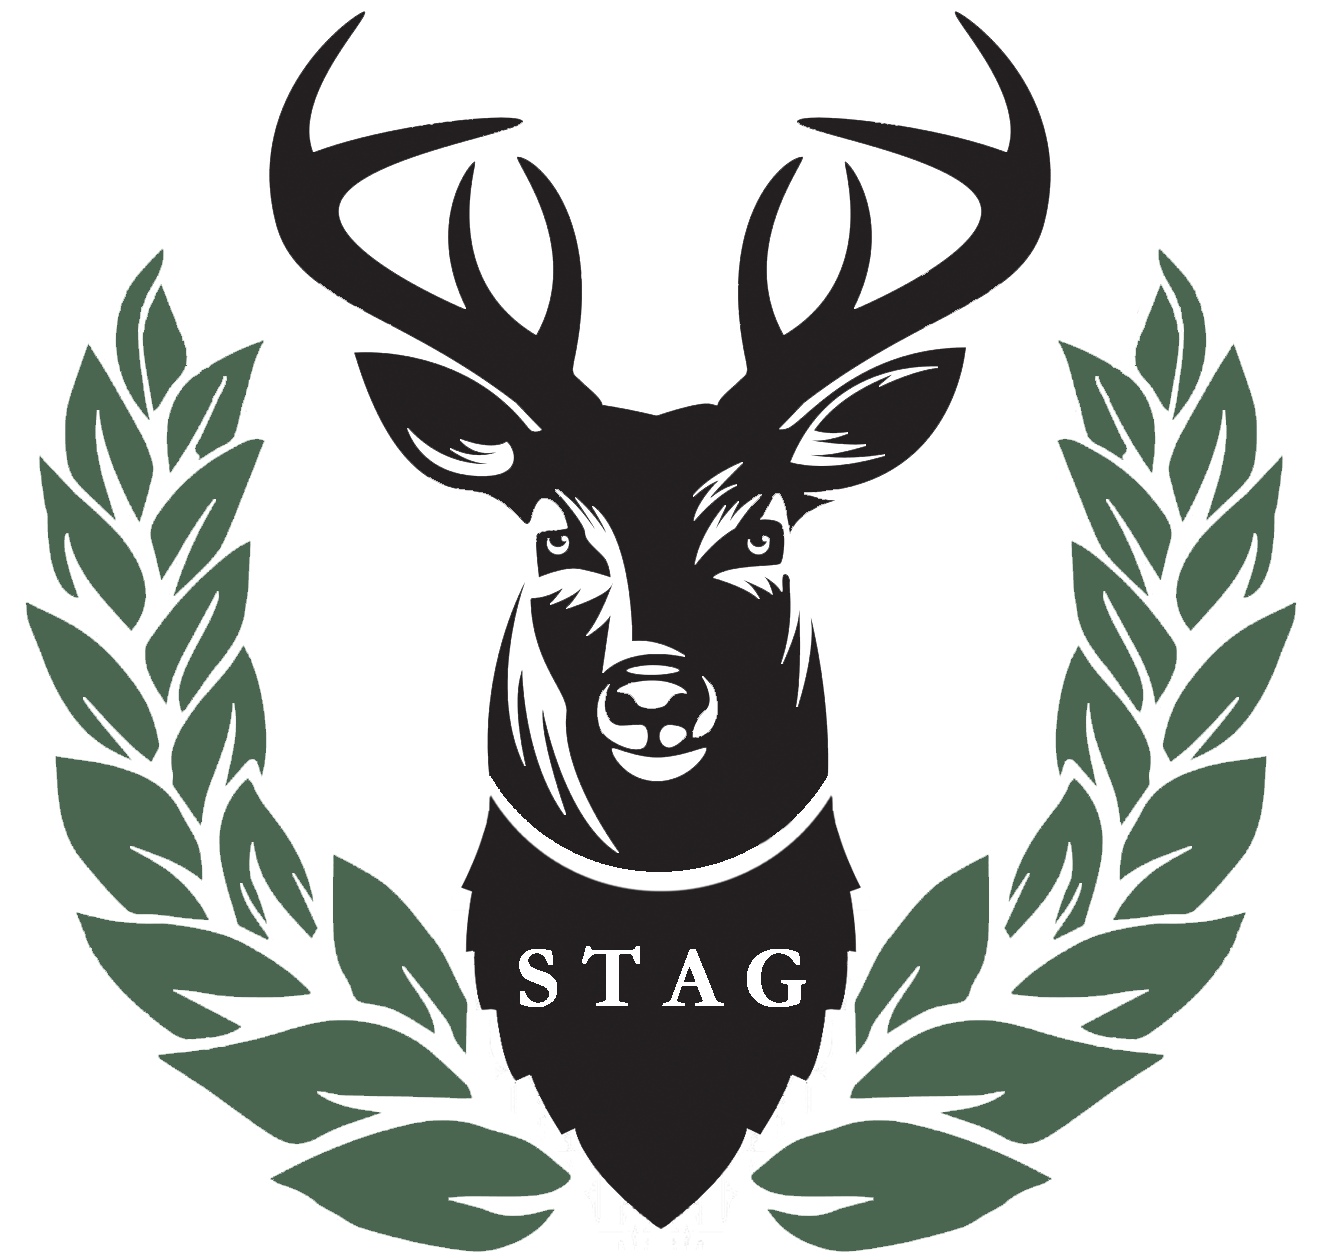 Stag Illustration by Elmrichdesign on Dribbble